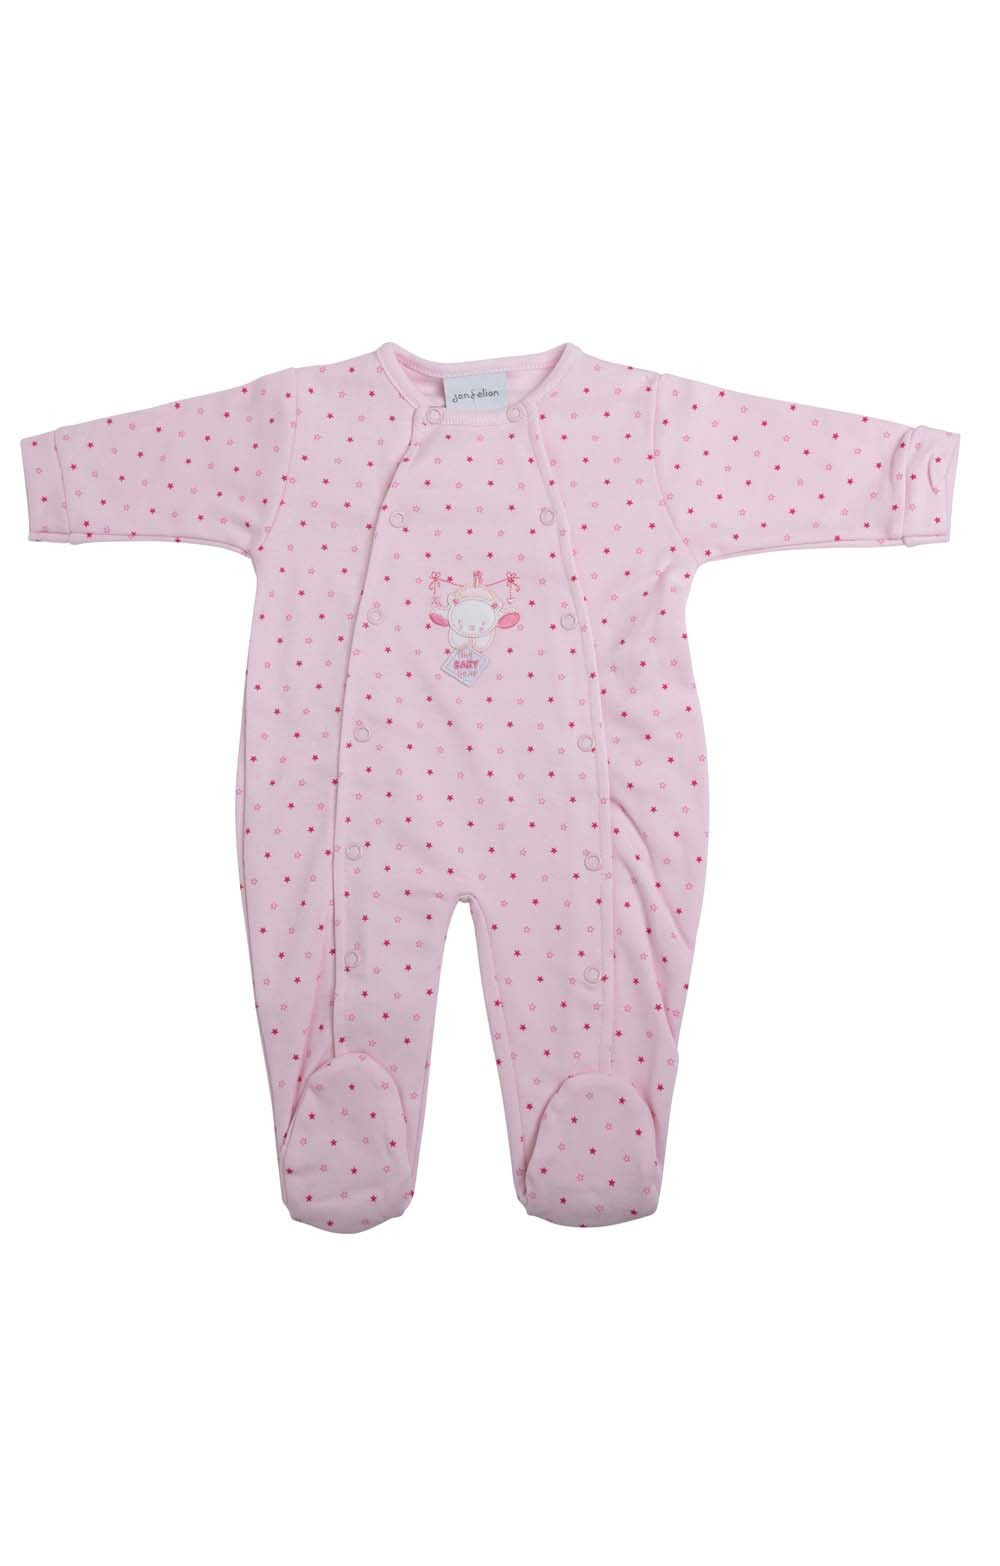 House Of Bruar Tiny Bear Sleepsuit | 0-3 Months | Pink